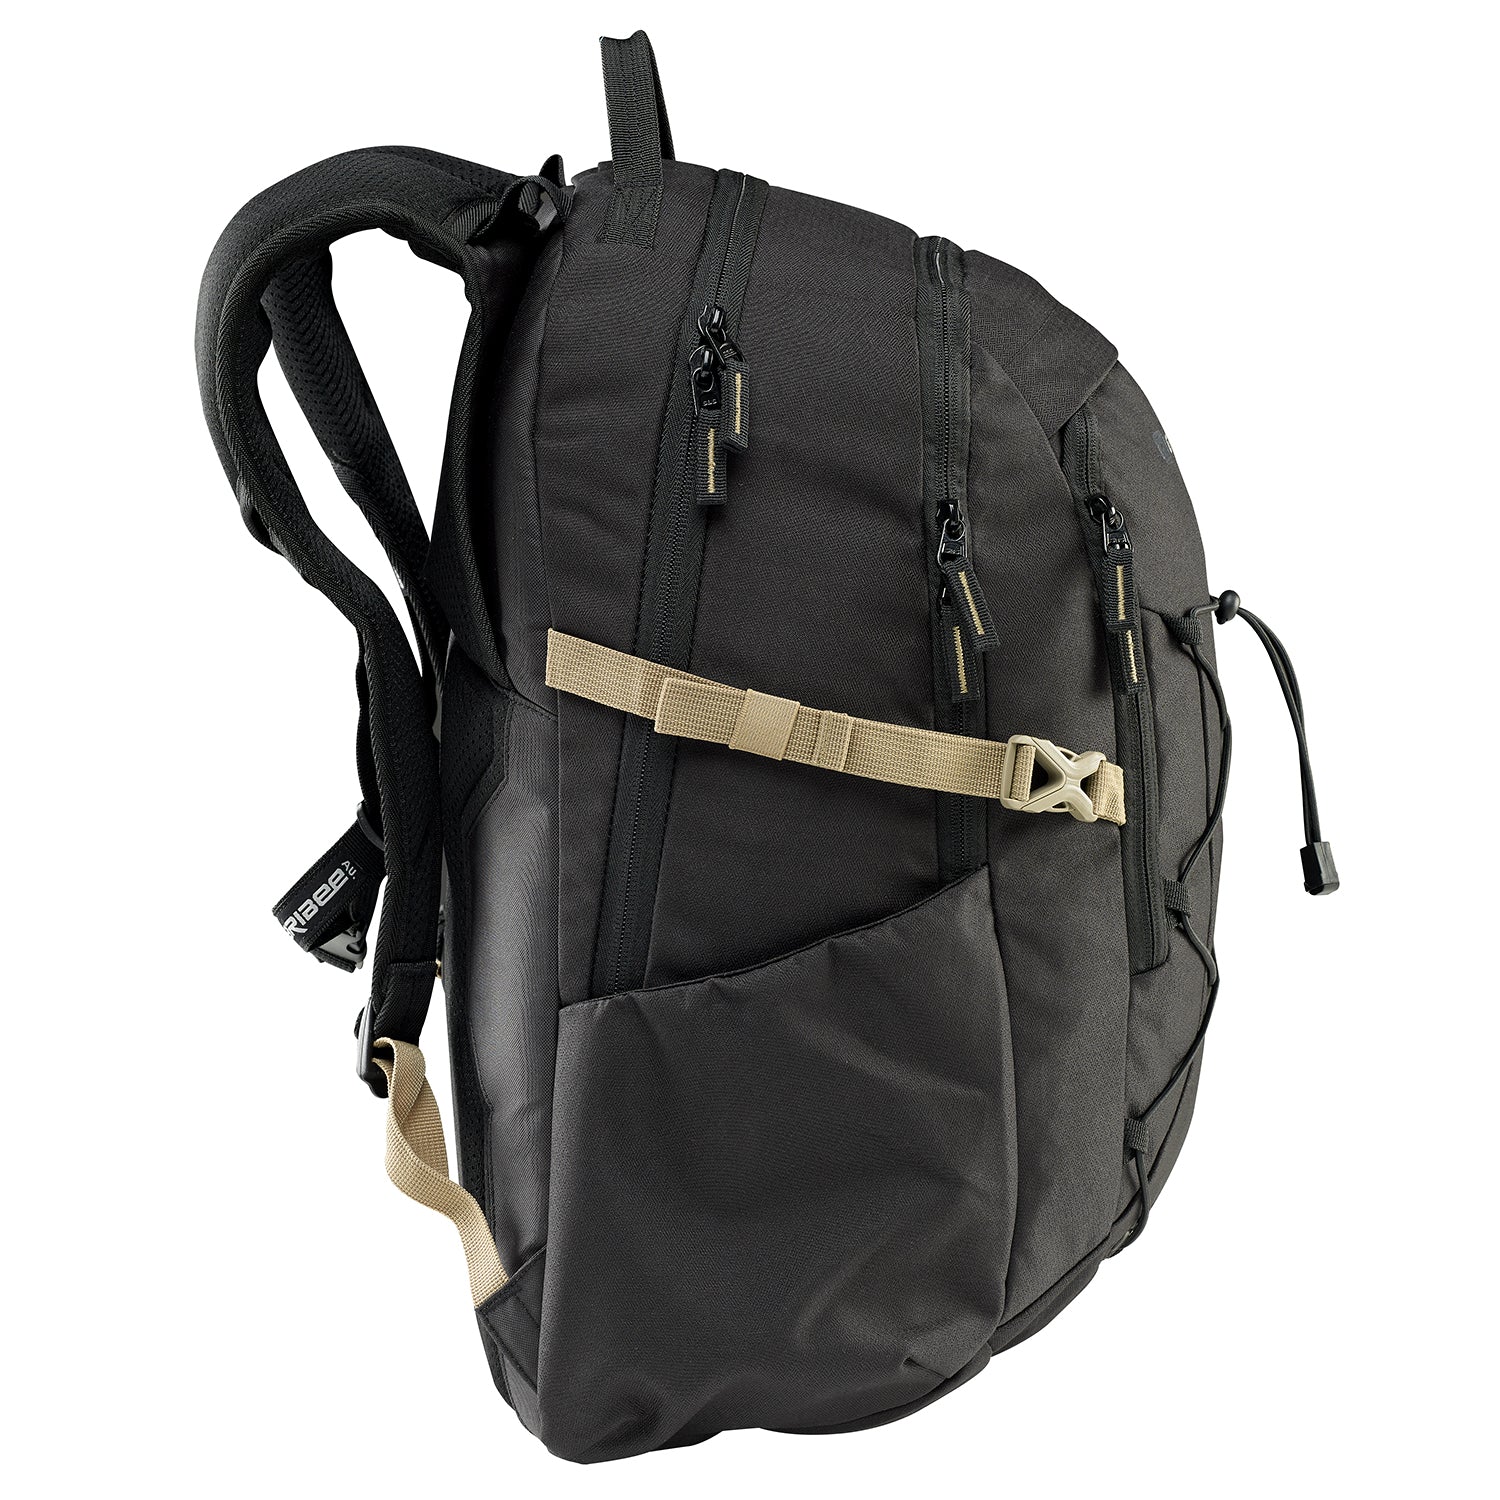 Caribee Wasp 30L backpack with raincover side - Black